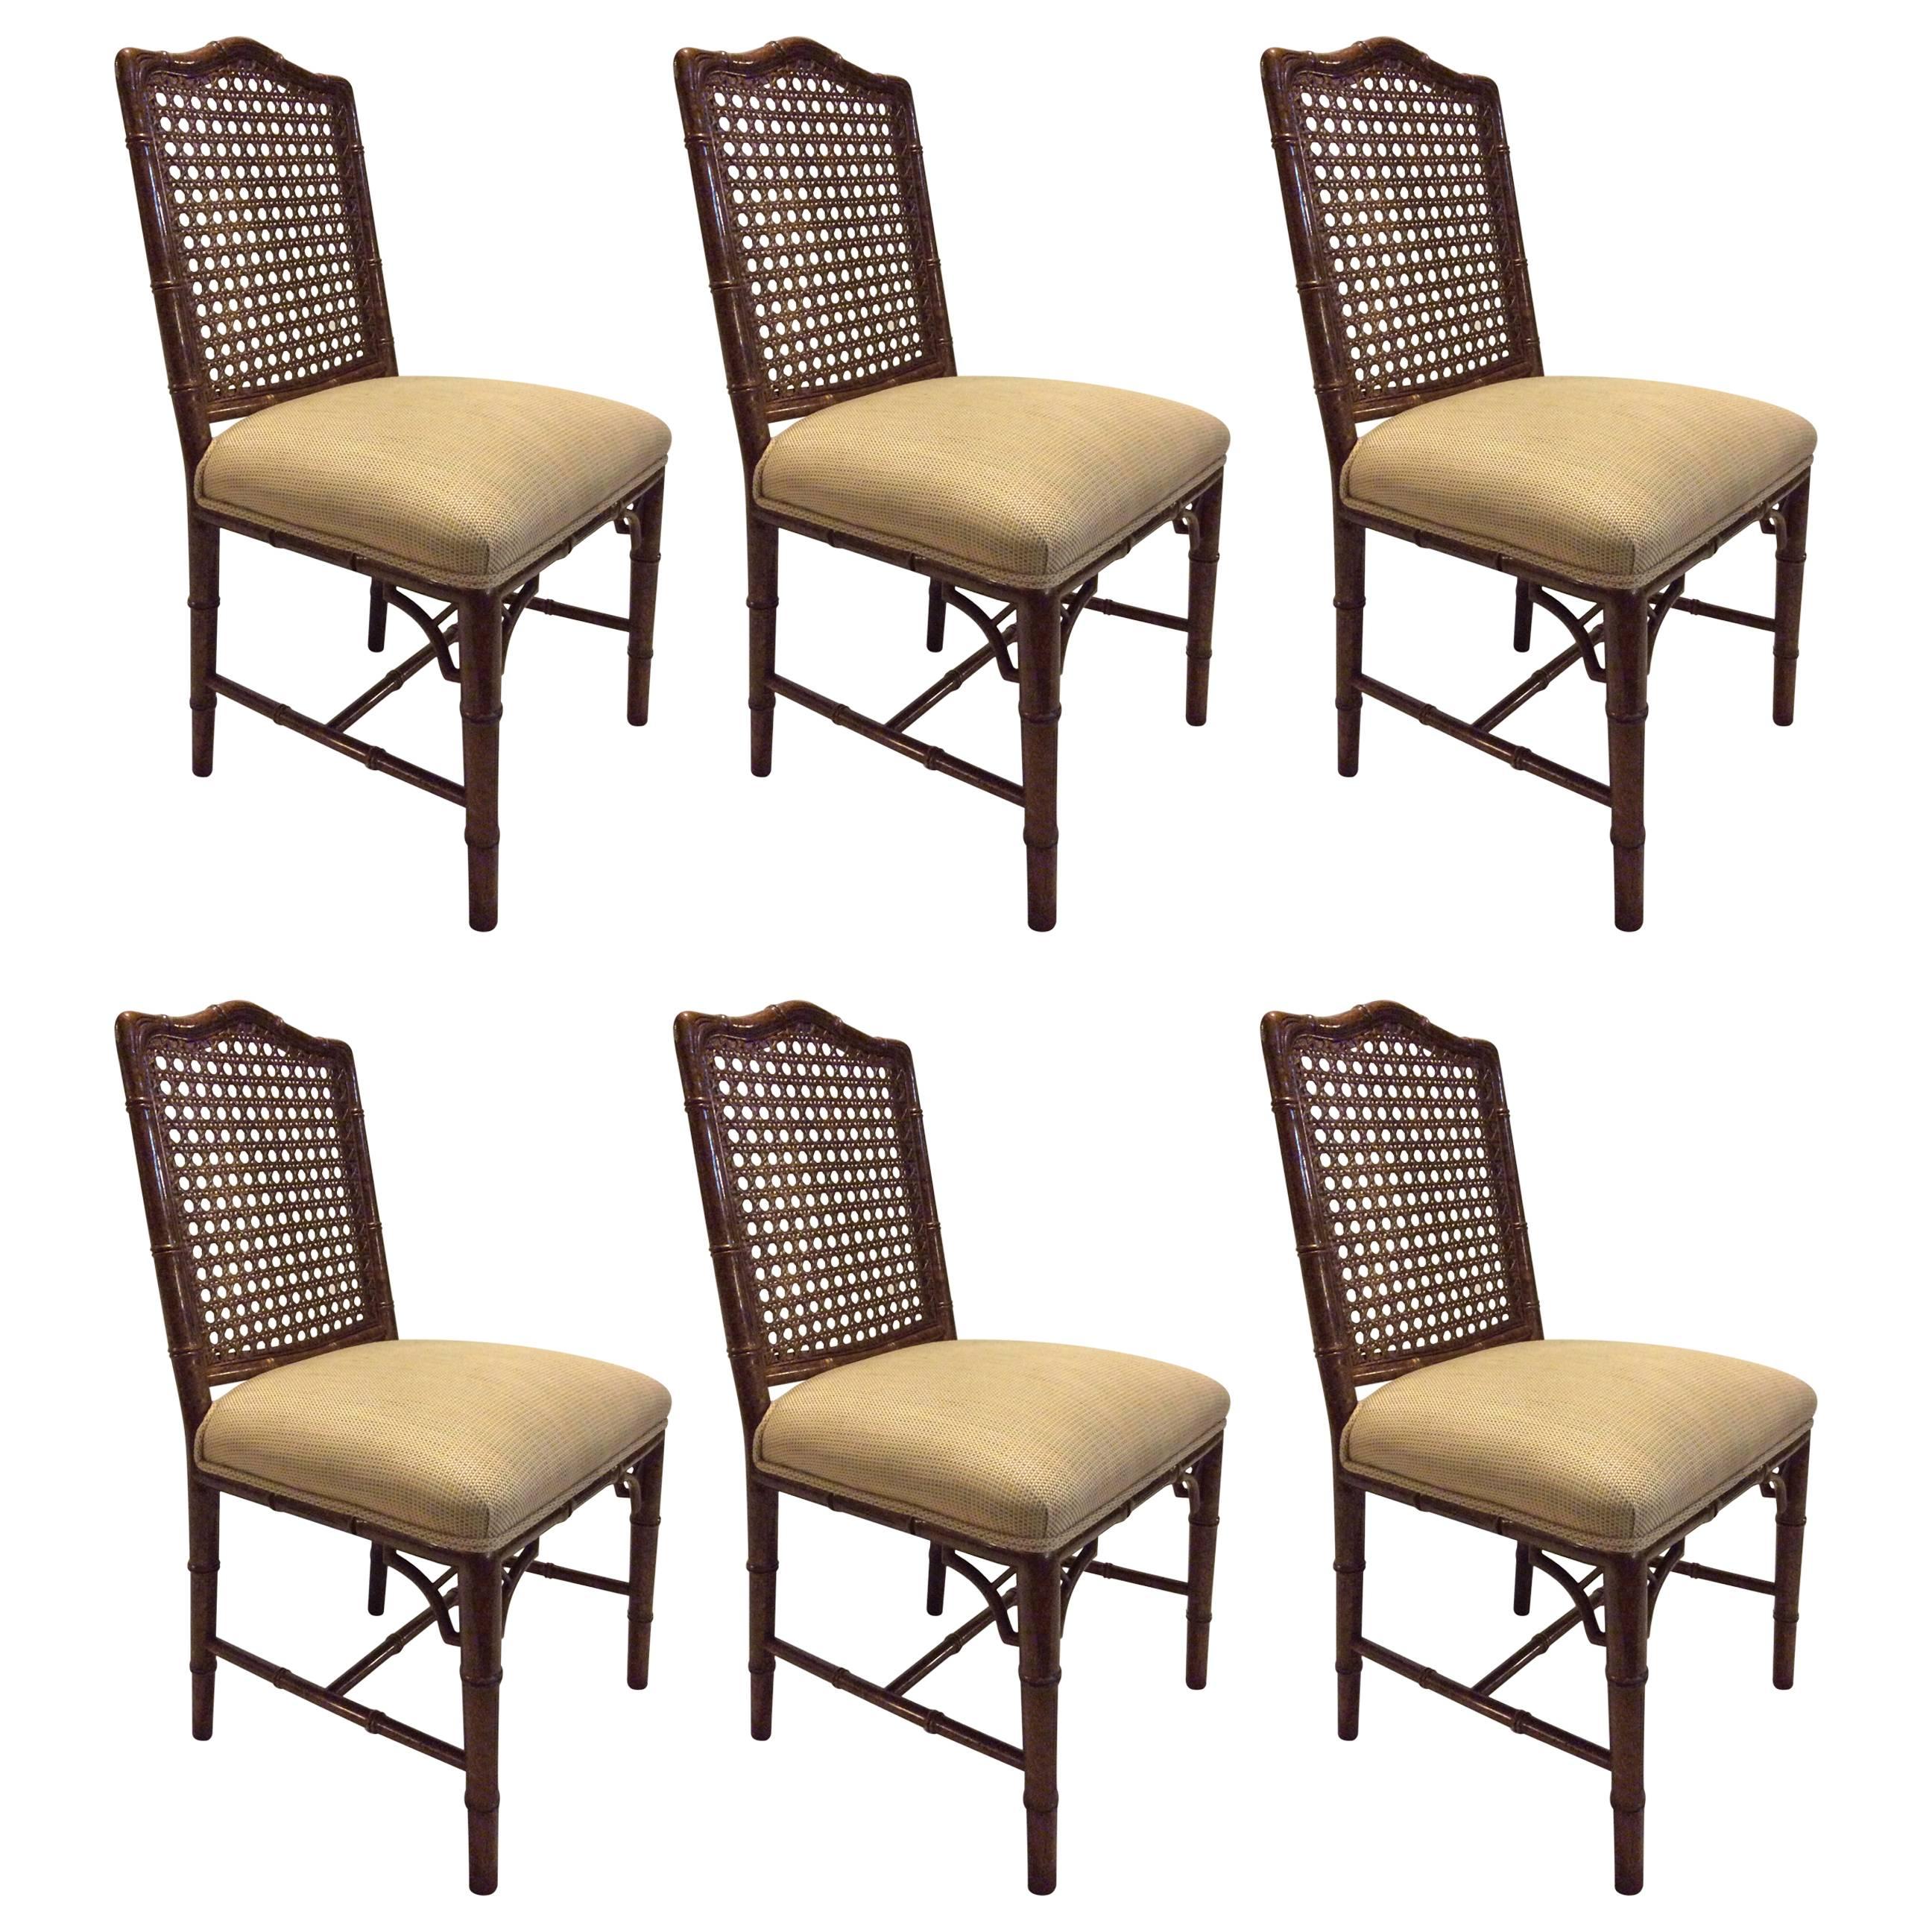 Chinese Chippendale Faux Bamboo Arm and Side Chairs, Six in Total For Sale